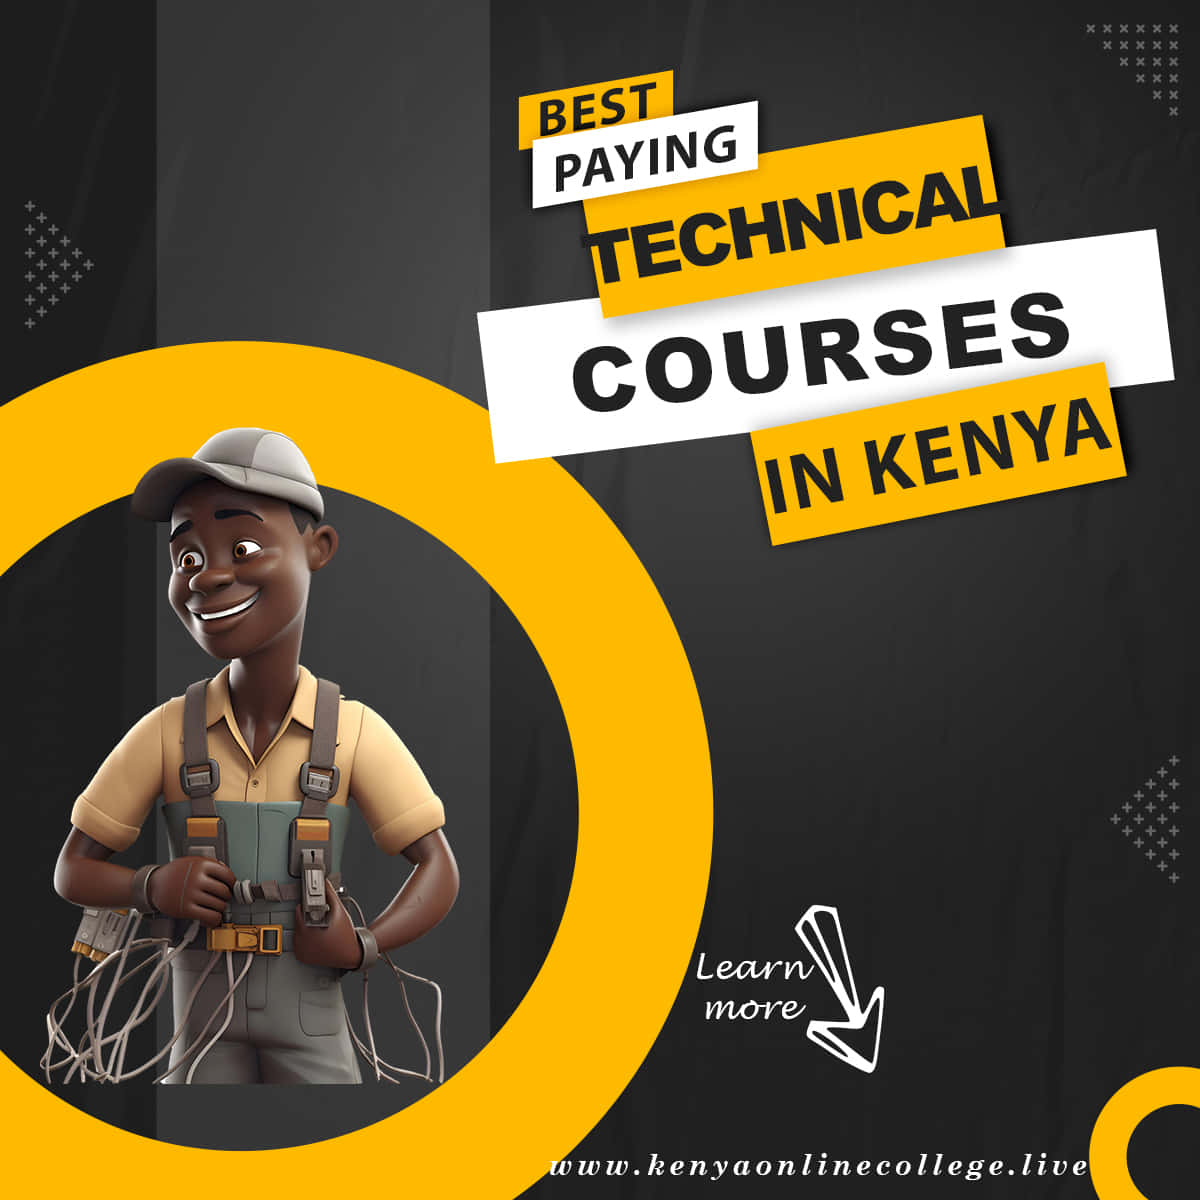 Best paying technical courses in Kenya